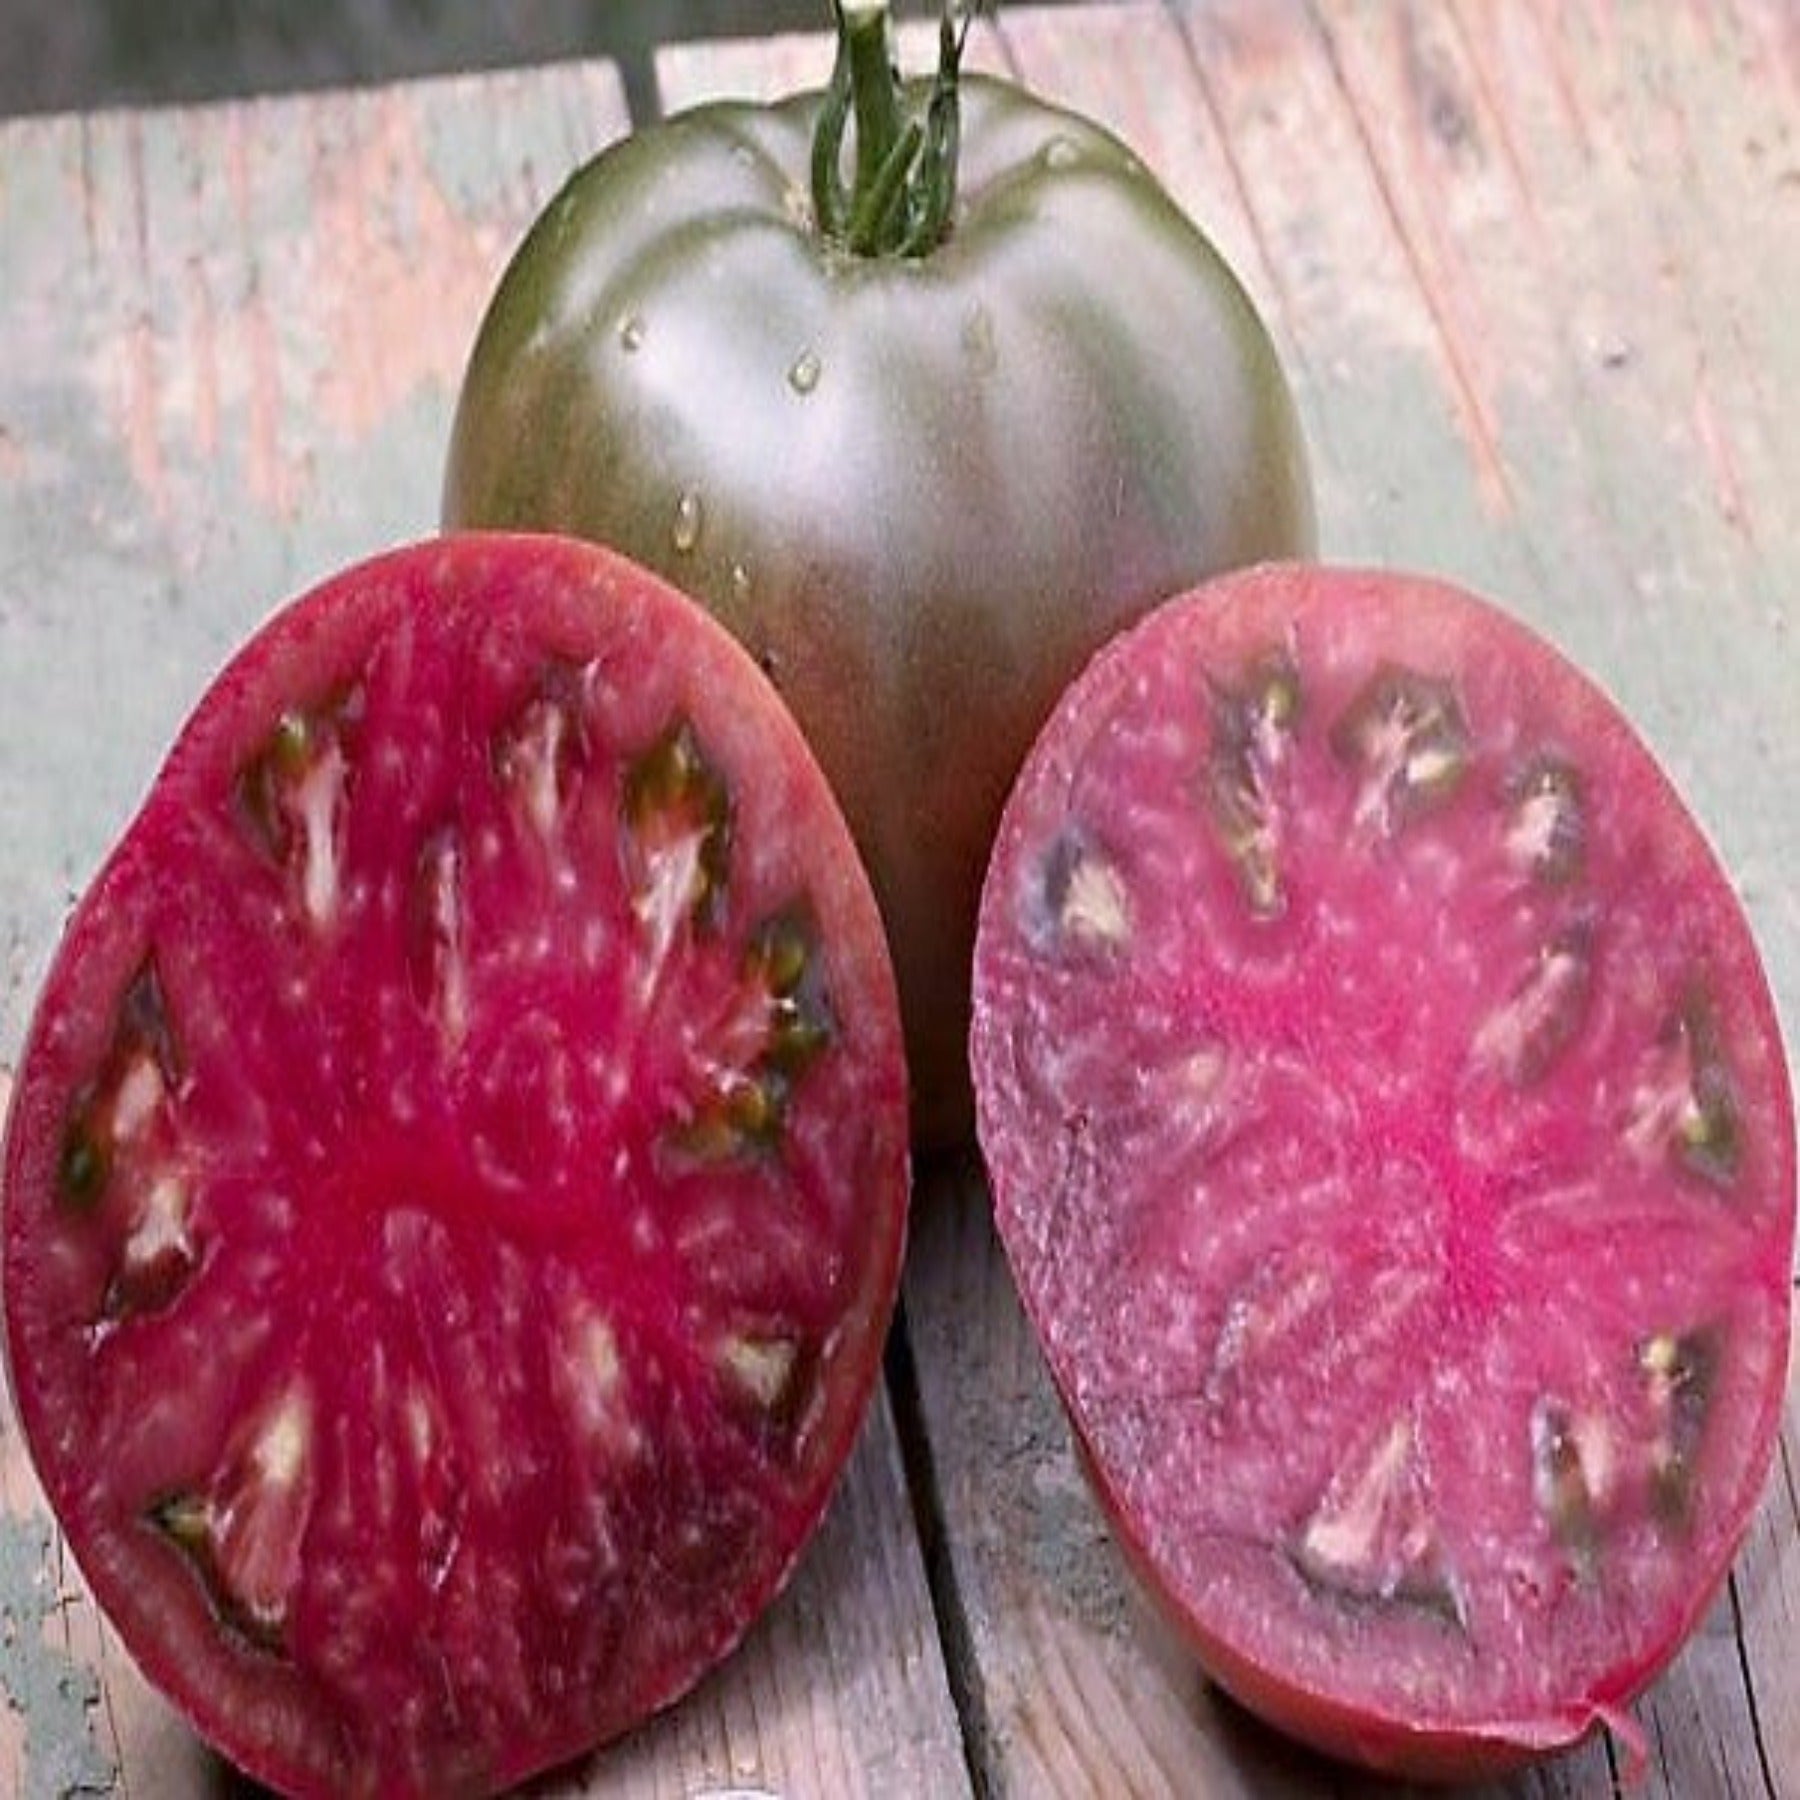 Martian Giant Slicer Heirloom Certified-Organic Tomato Seed